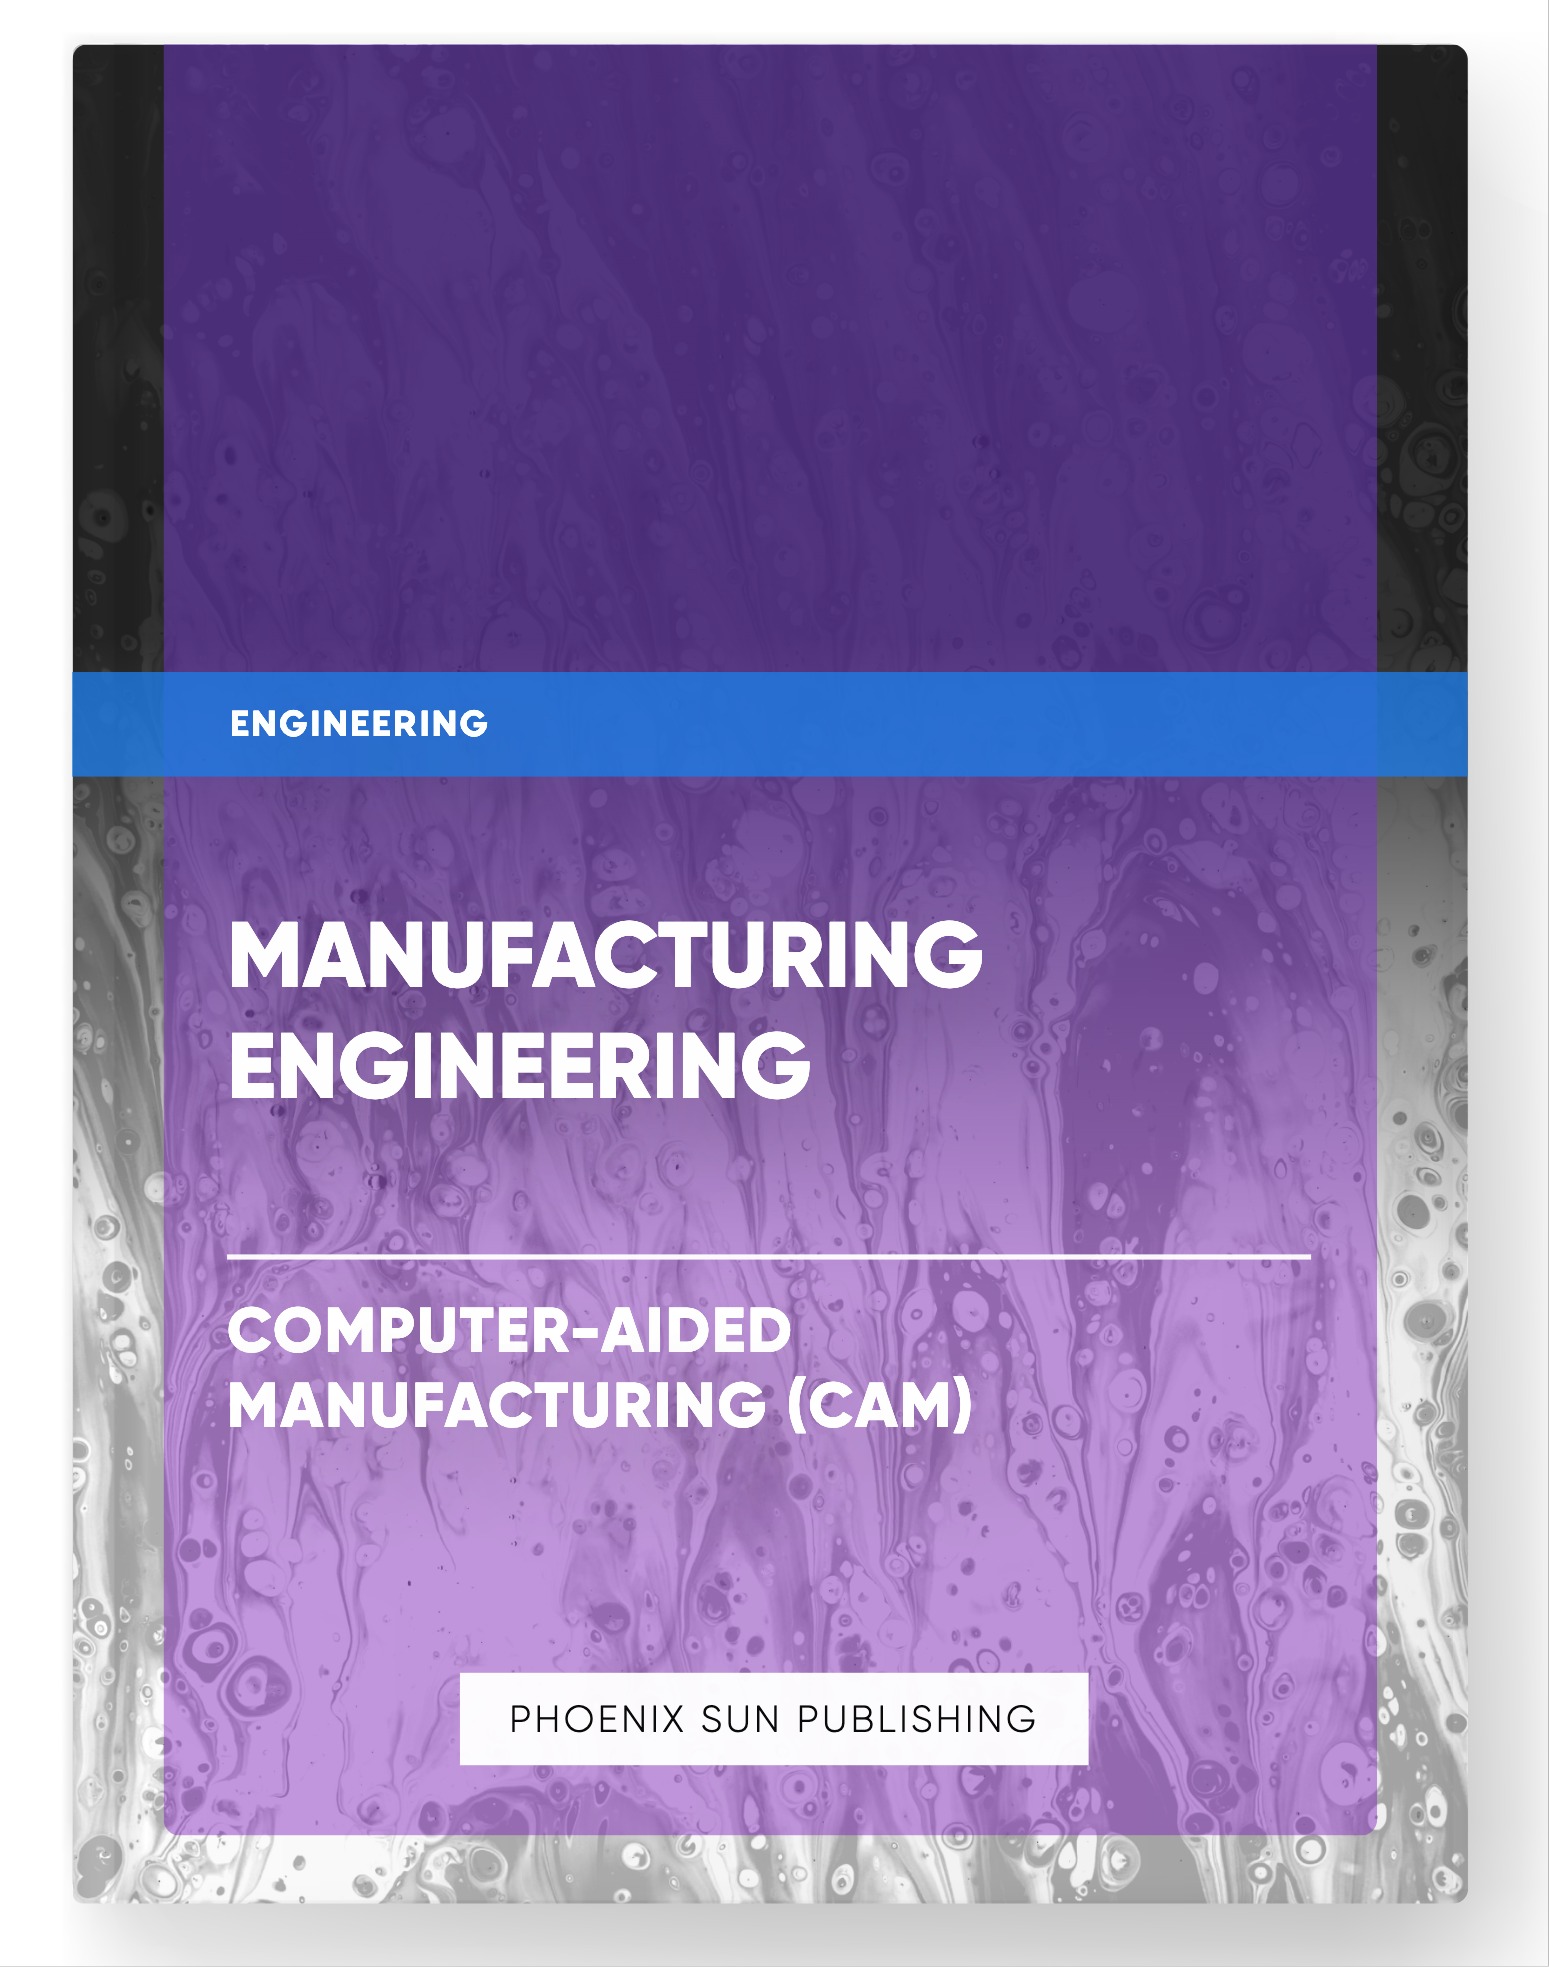 Manufacturing Engineering – Computer-Aided Manufacturing (CAM)